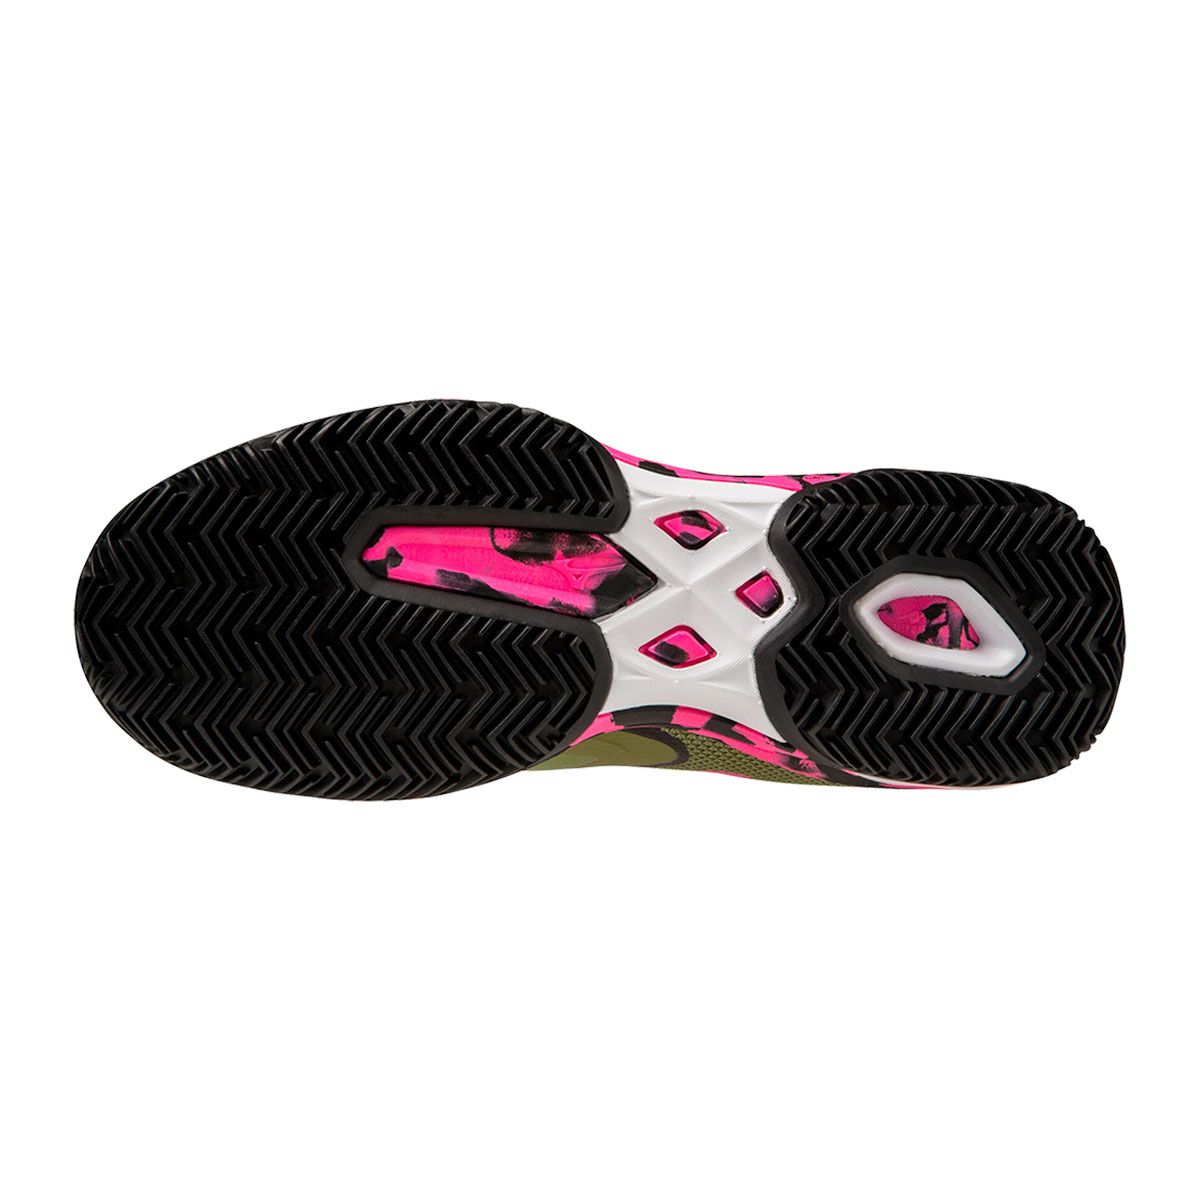 WAVE EXCEED LIGHT 2 PADEL SHOES